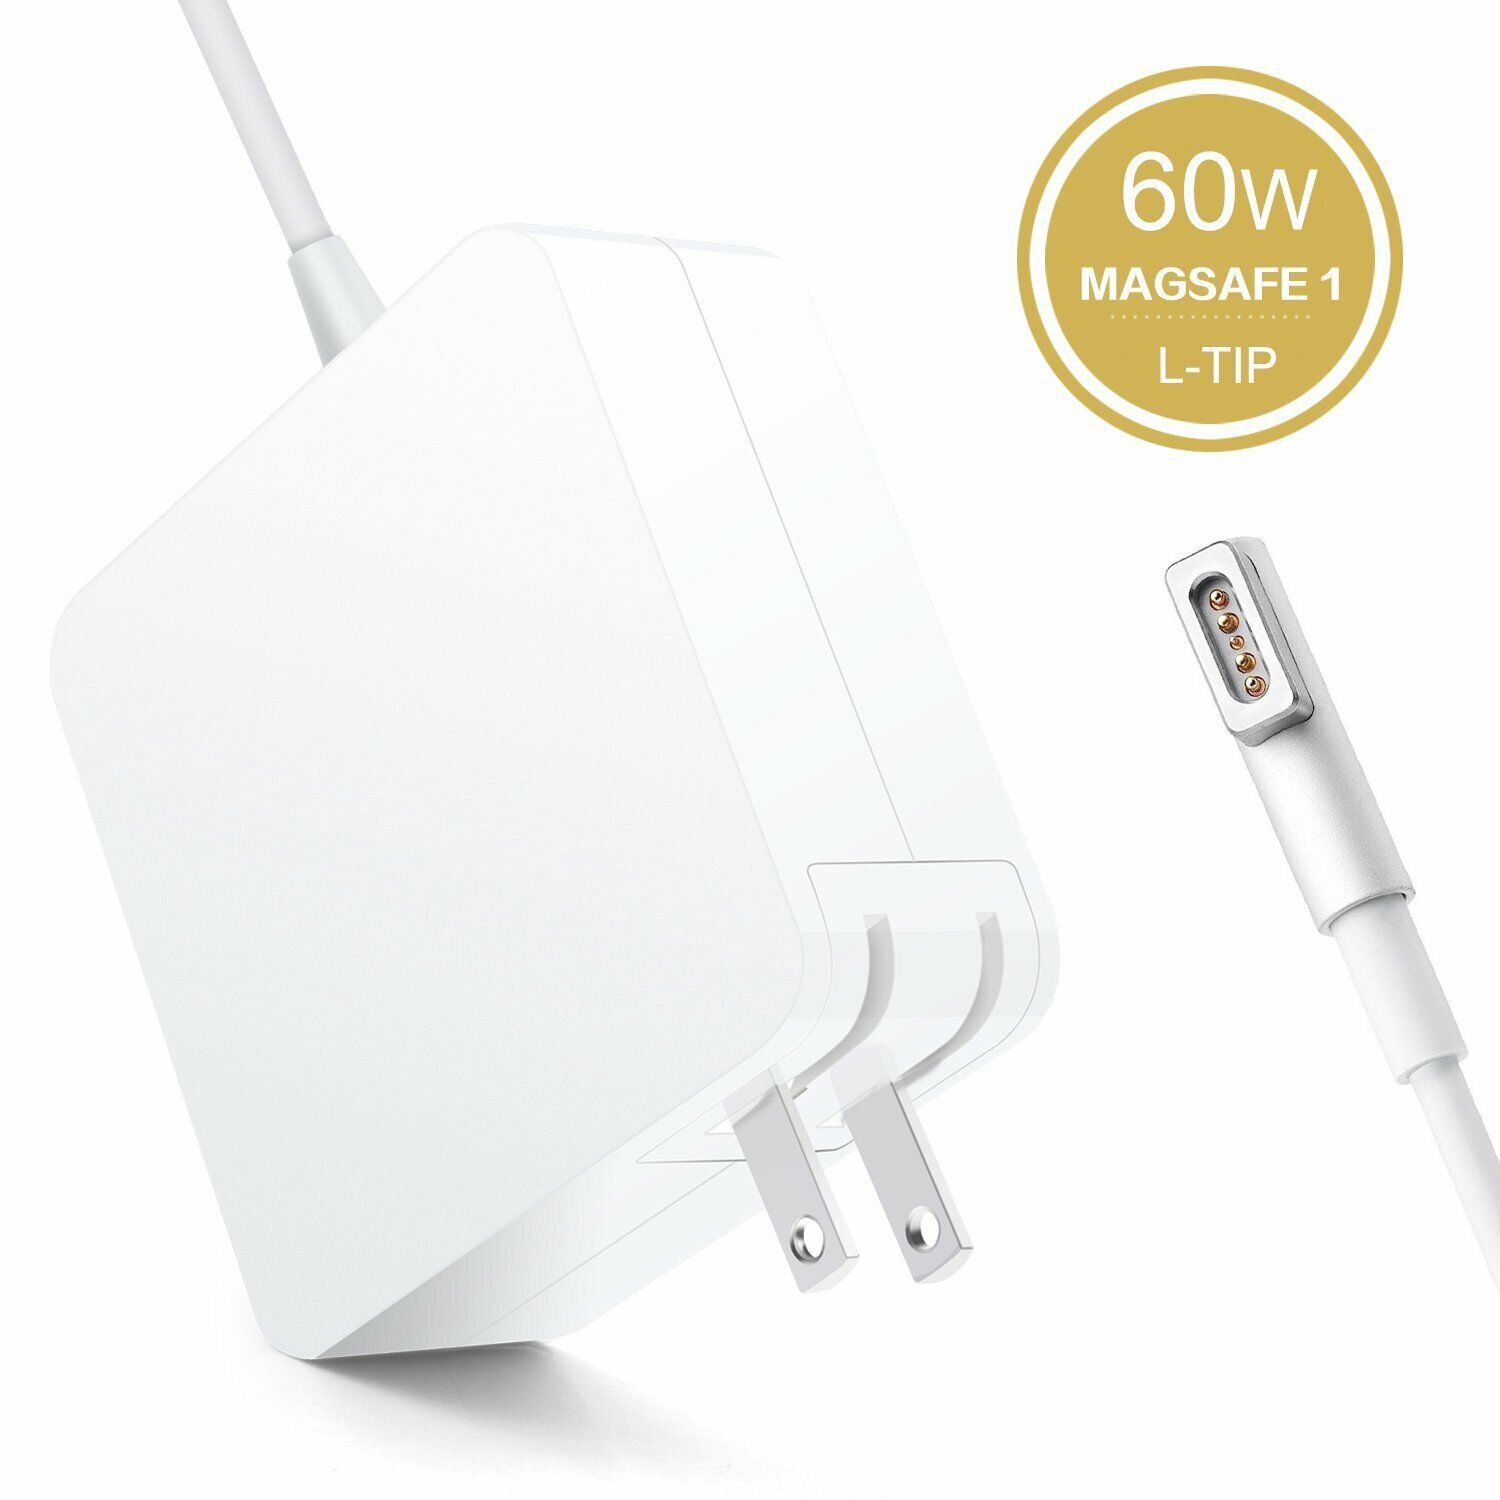 Replacement 60W Magsafe 1 Power Adapter for MacBook A1278 A1181 A1184 A1344